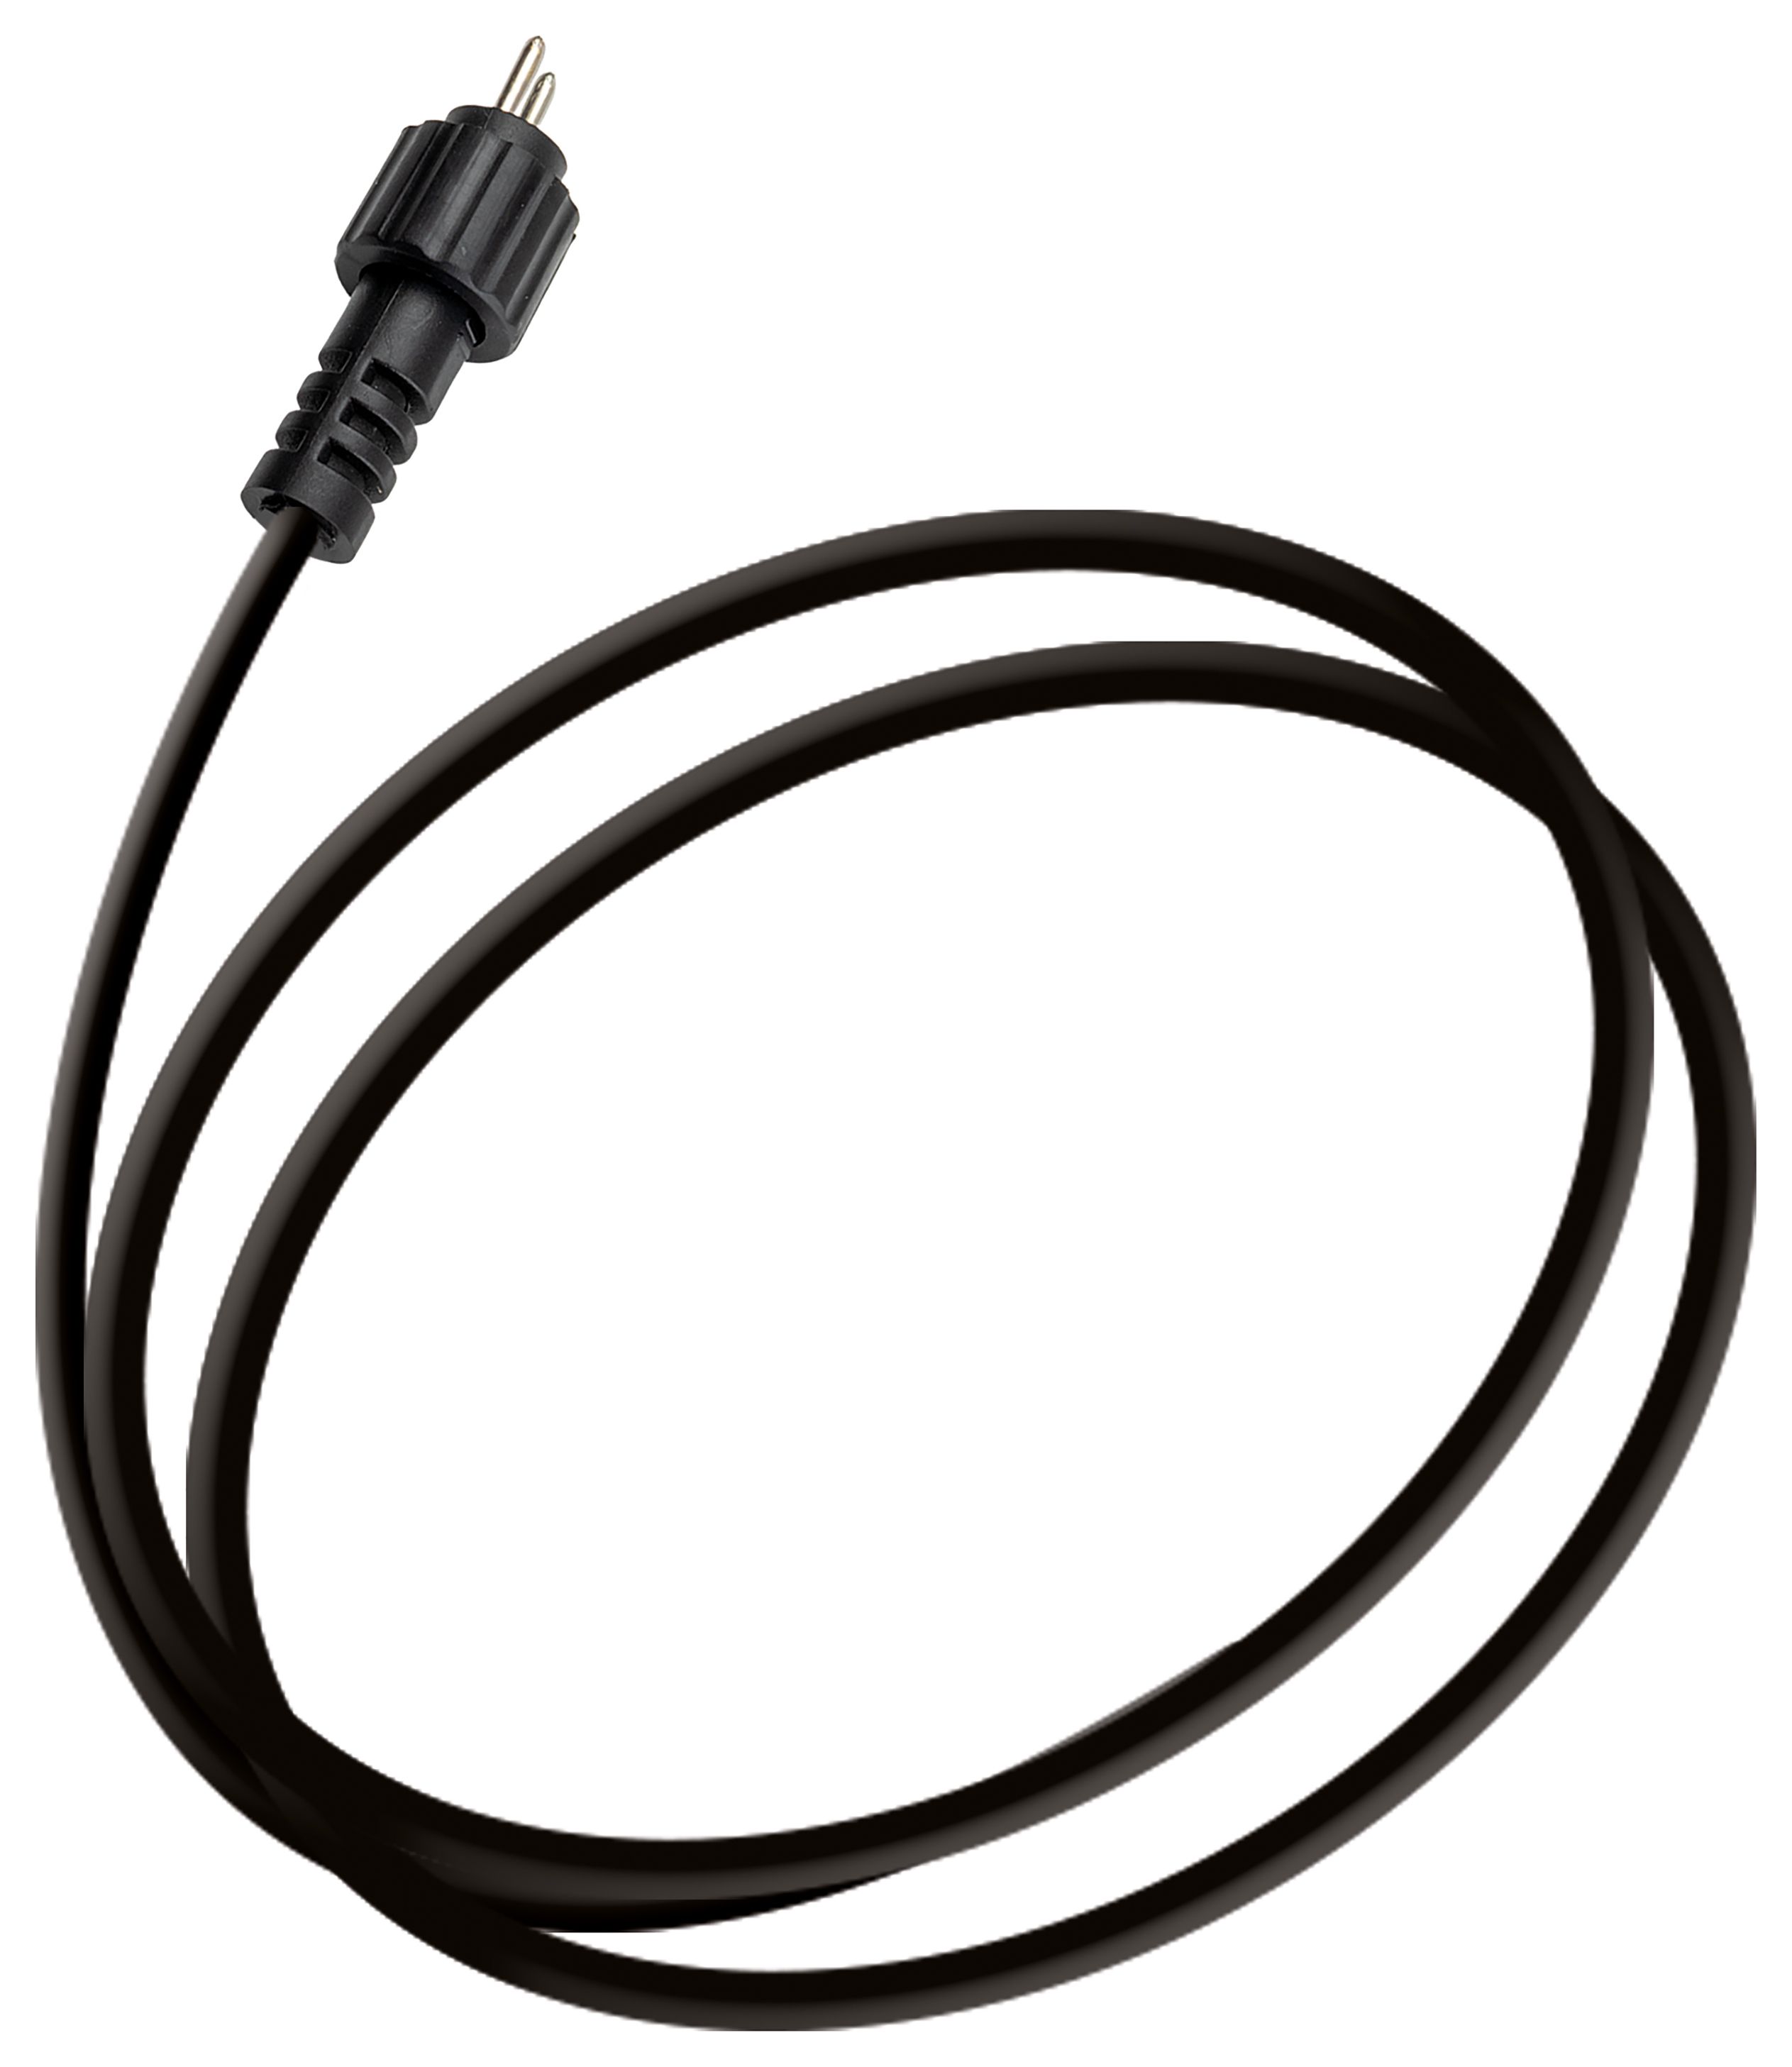 Image of Luceco LED Garden Spike Kit Extension Cable - 2m